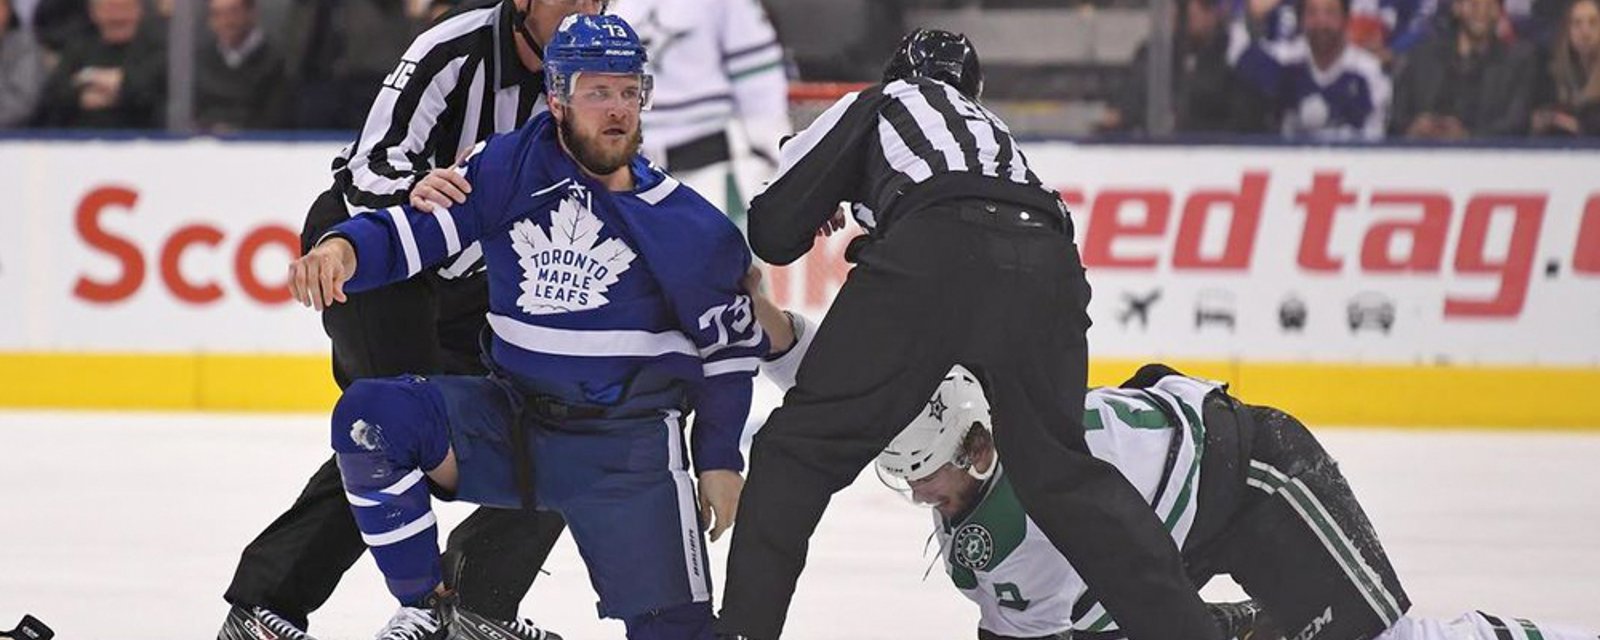 Confirmed: Kyle Clifford will not re-sign with Leafs